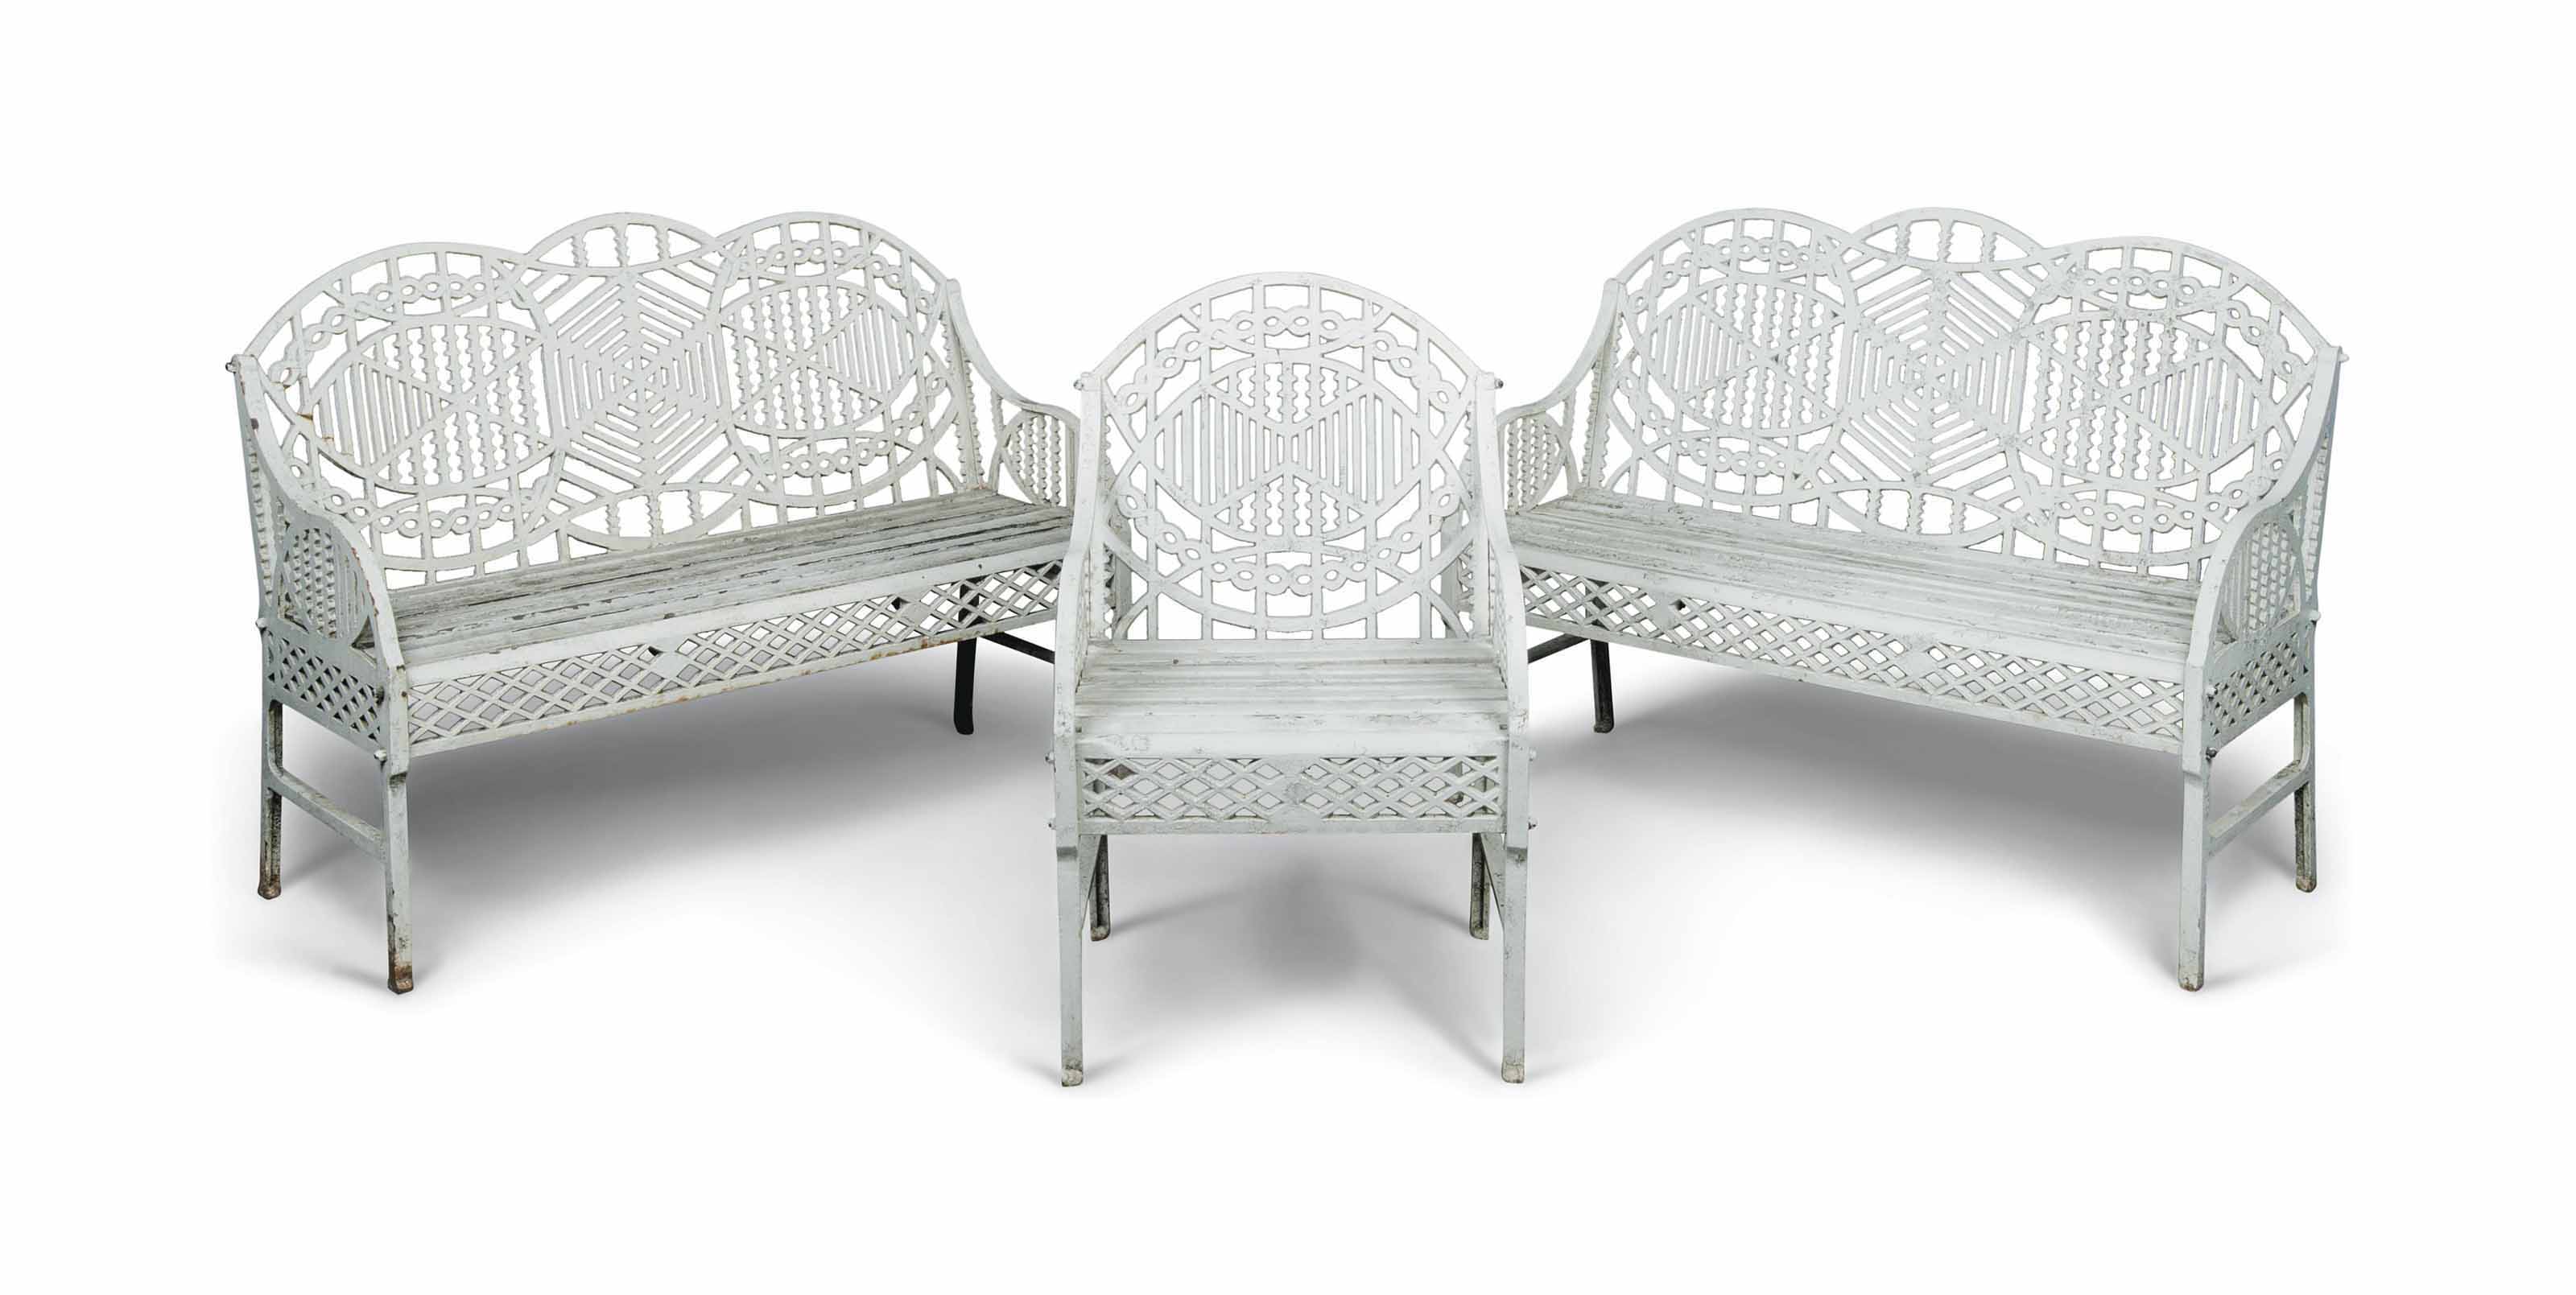 A PAIR OF CAST-IRON GARDEN SEATS AND A MATCHING CHAIR | DESIGNED BY ...